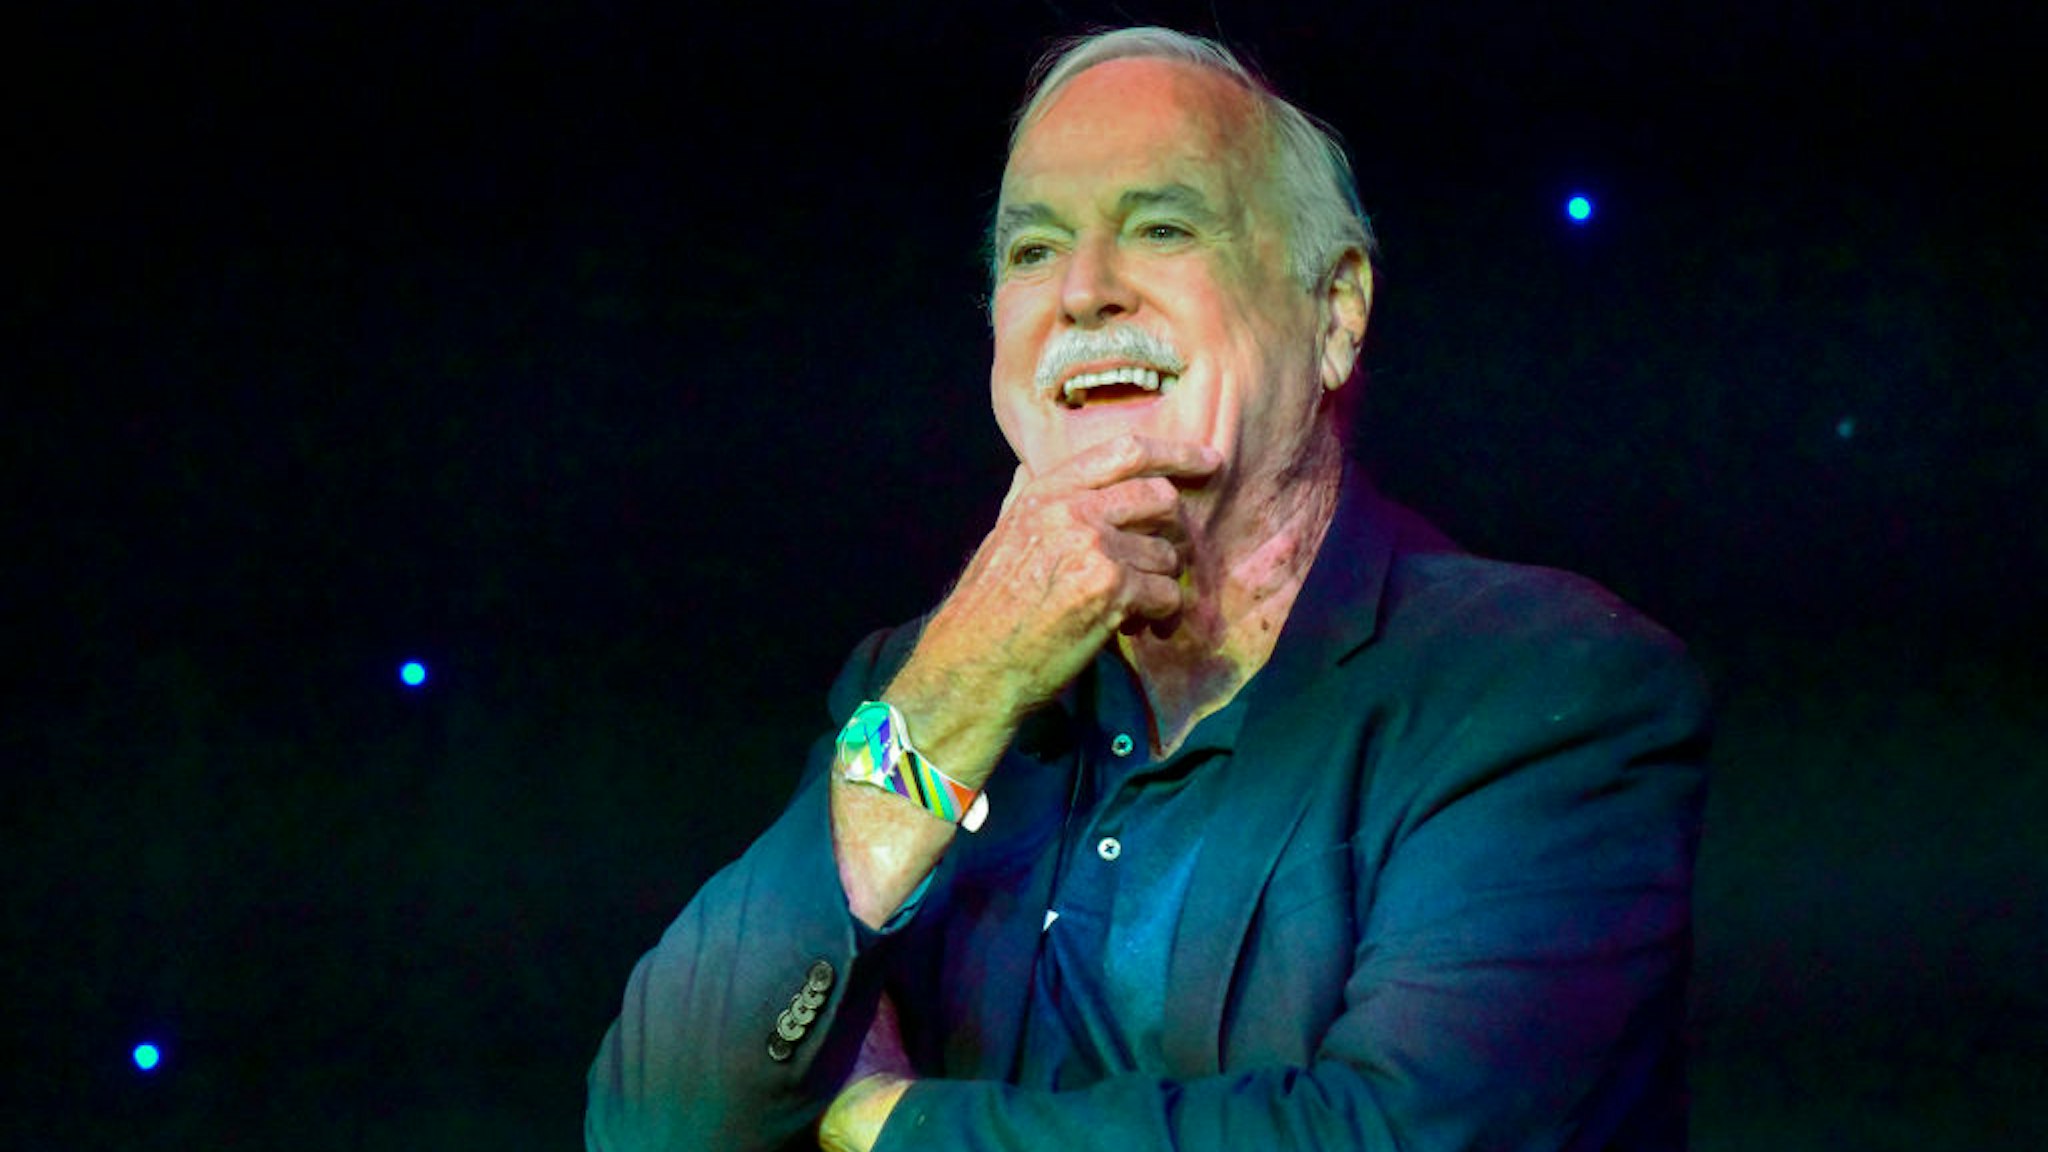 AUSTIN, TEXAS - MARCH 12: John Cleese speaks onstage at 'Comedy with the Cleeses' during the 2022 SXSW Conference and Festivals at Creek and the Cave on March 12, 2022 in Austin, Texas. (Photo by Amanda Stronza/Getty Images for SXSW)